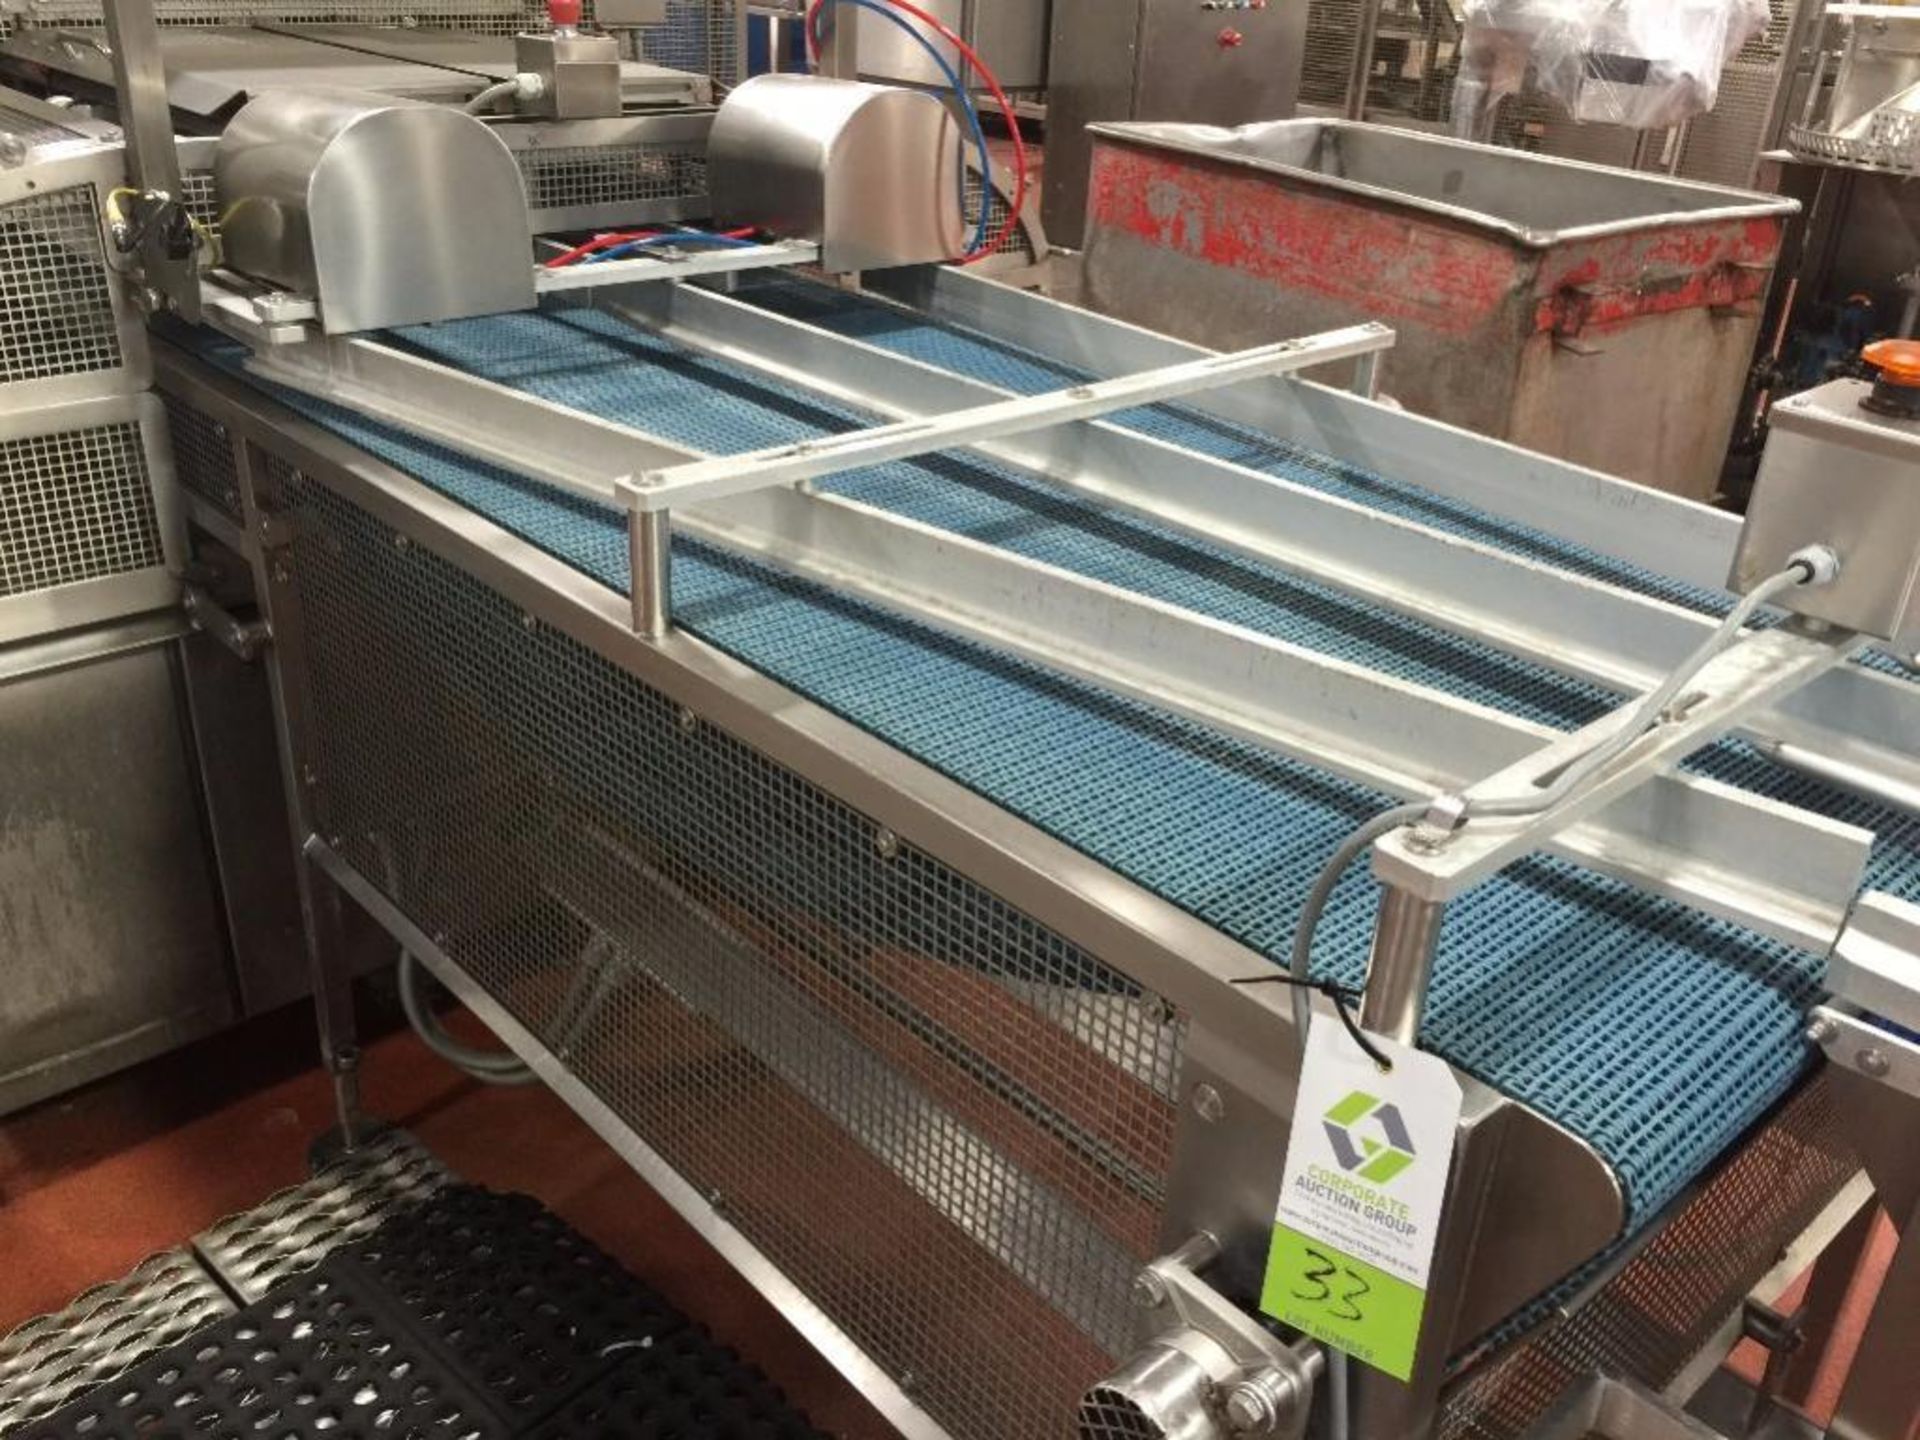 SS conveyor out of Mondini, 4 lane to 2 lane diverter, 35 in wide x 112 in long, blue plastic belt.